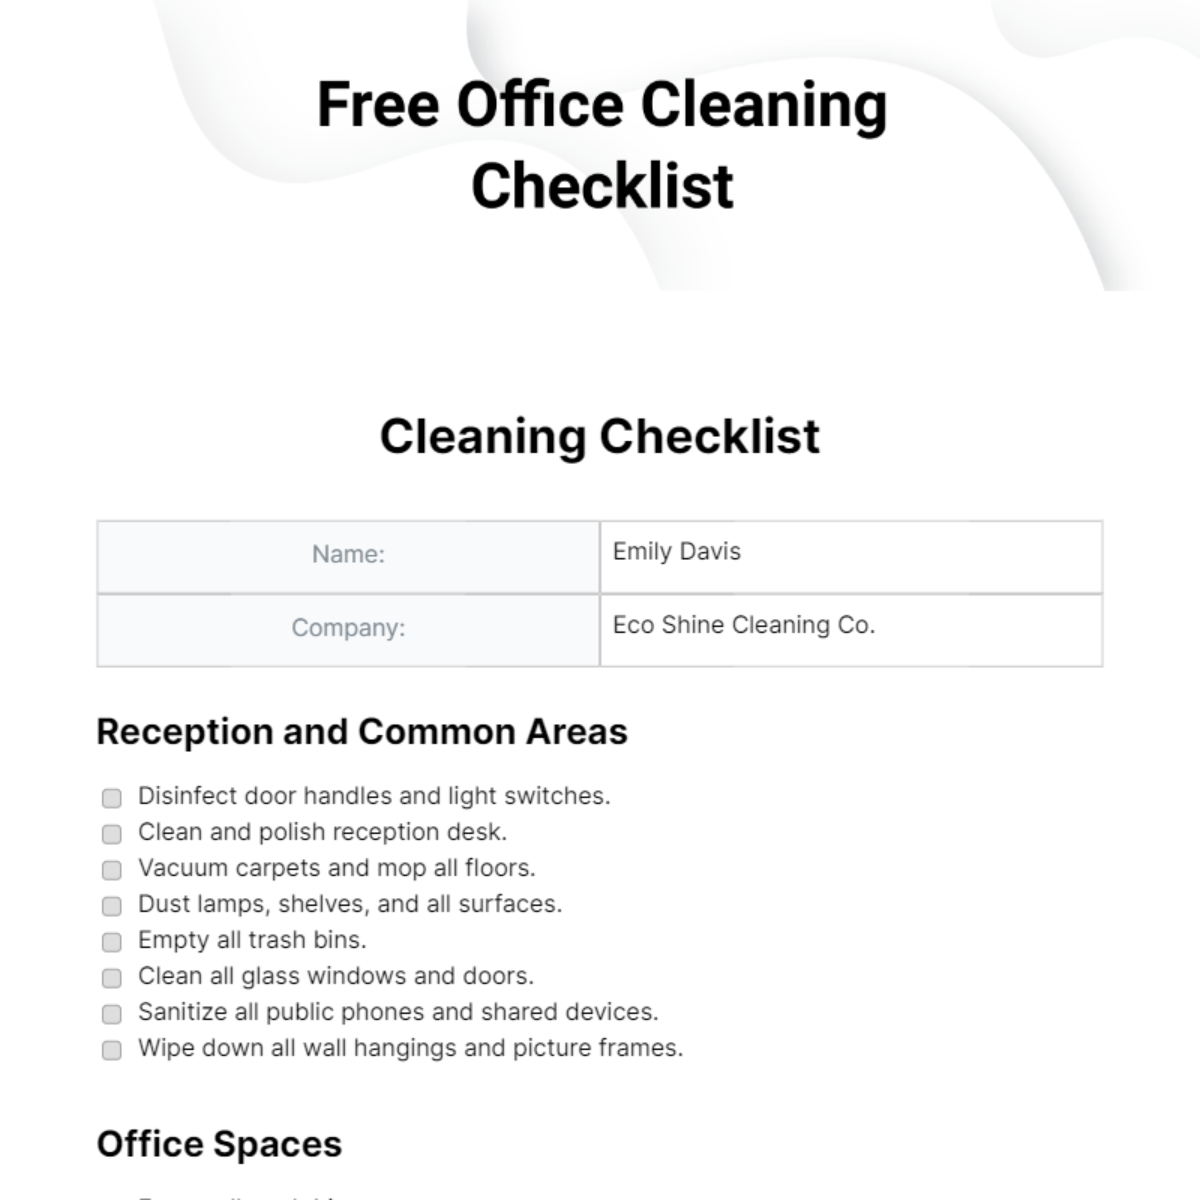 https://images.template.net/280109/Office-Cleaning-Checklist-edit-online.jpg